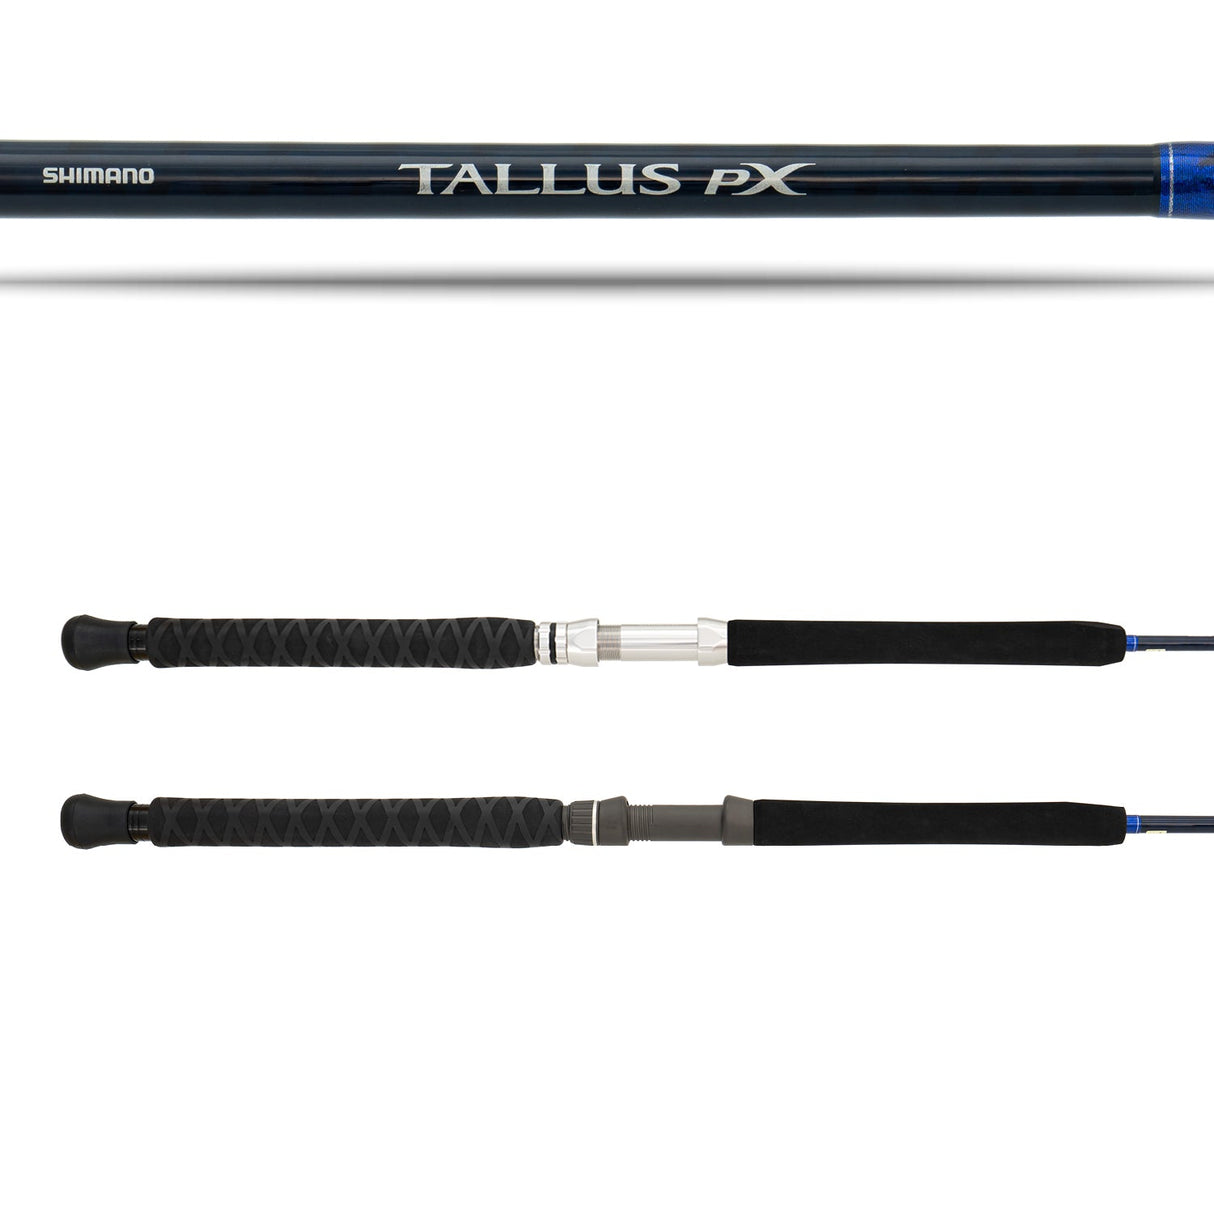 Shimano Tallus PX Conventional 60XH Rod